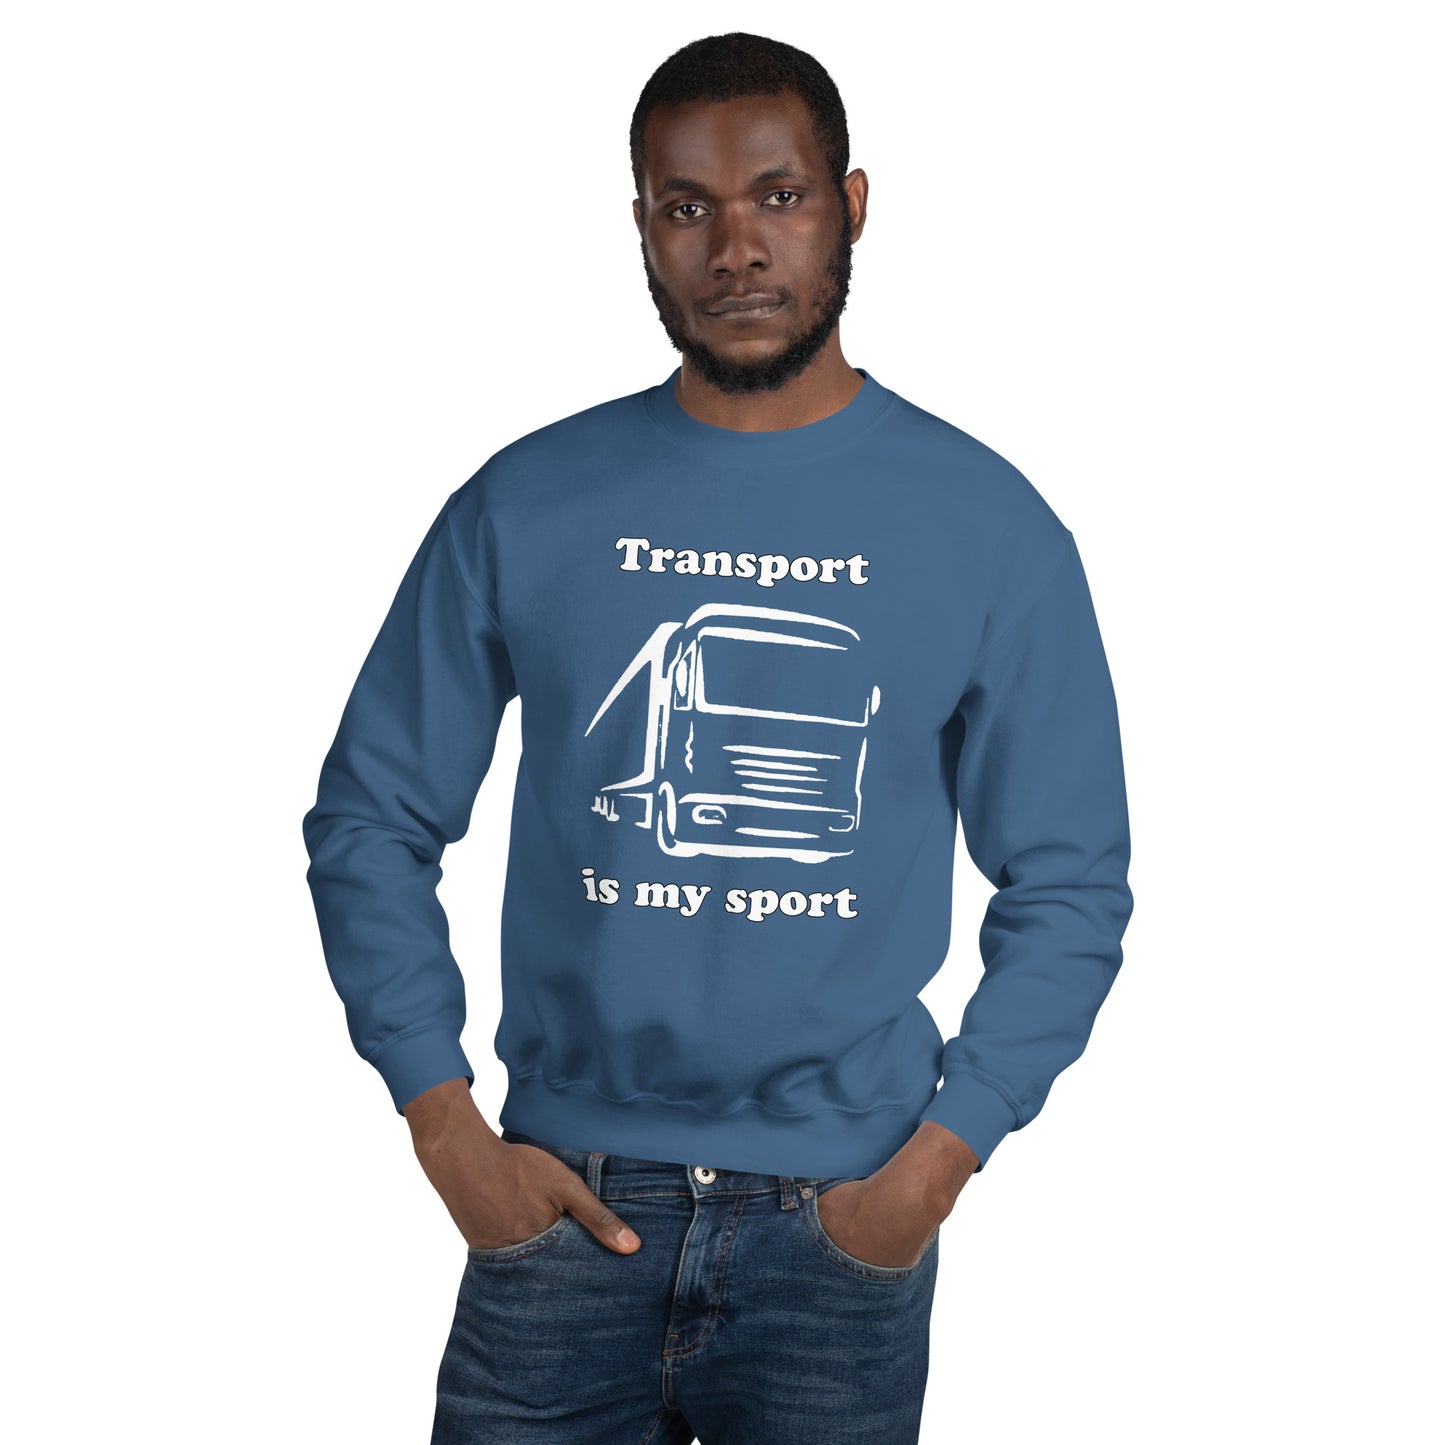 Man with indigo blue sweatshirt with picture of truck and text "Transport is my sport"